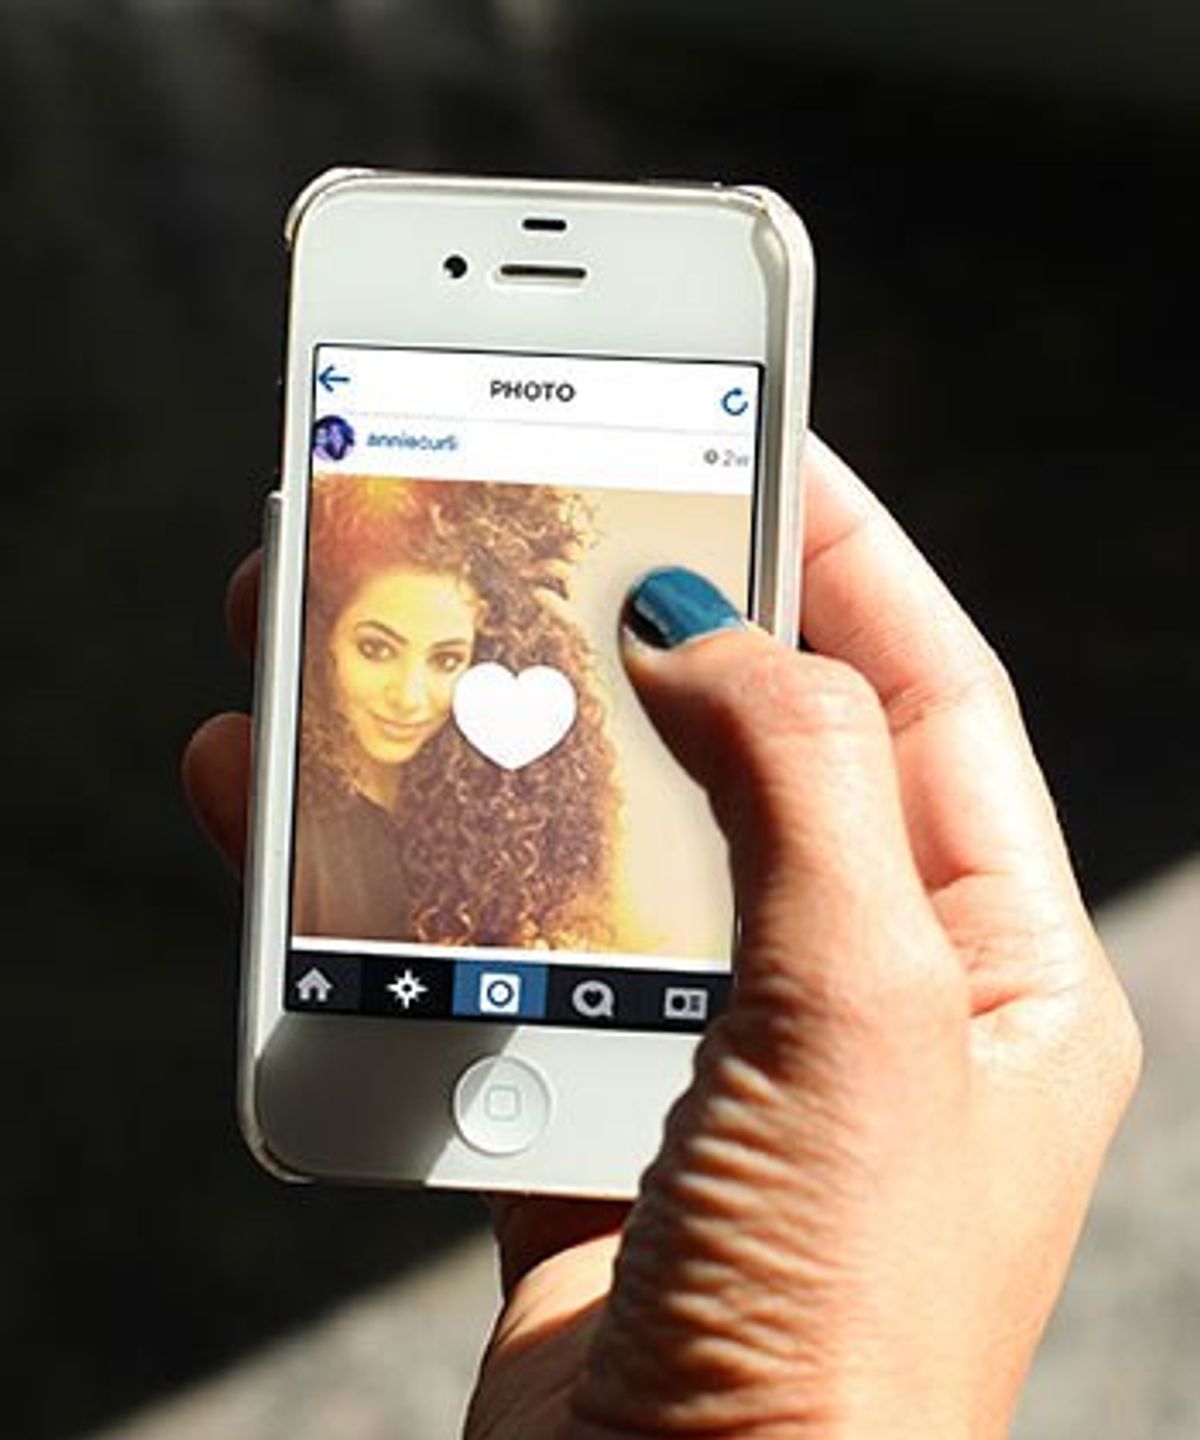 15 Thoughts You Have While Scrolling Through Instagram